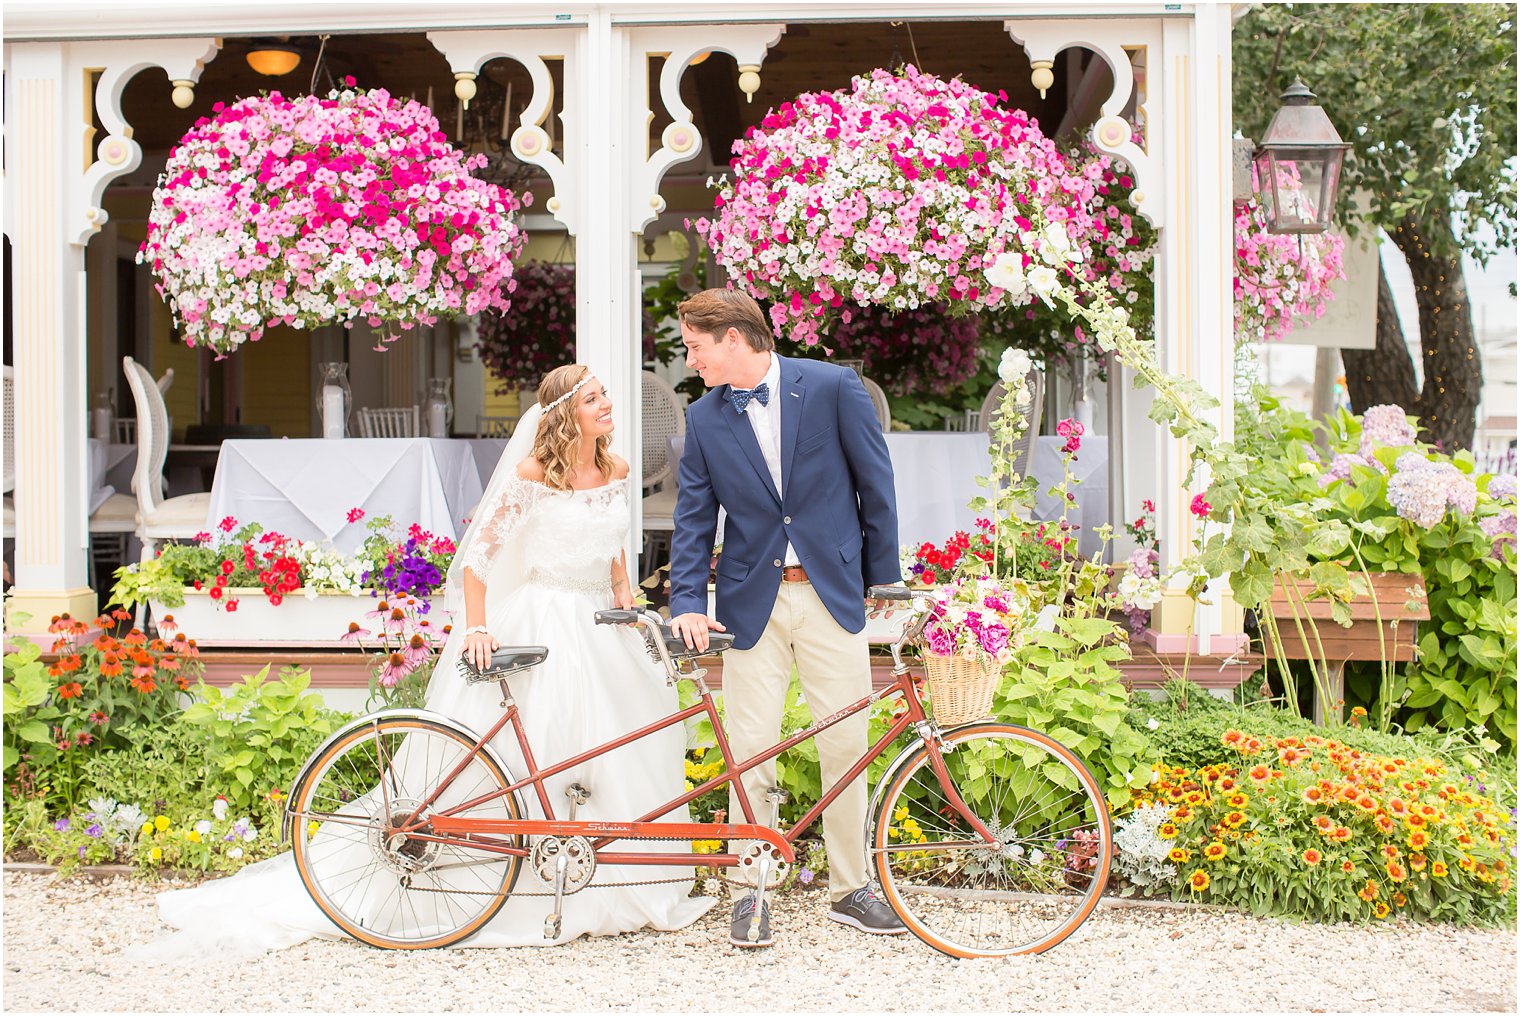 Bride and Groom with rental bike from Rustic Drift | LBI Wedding